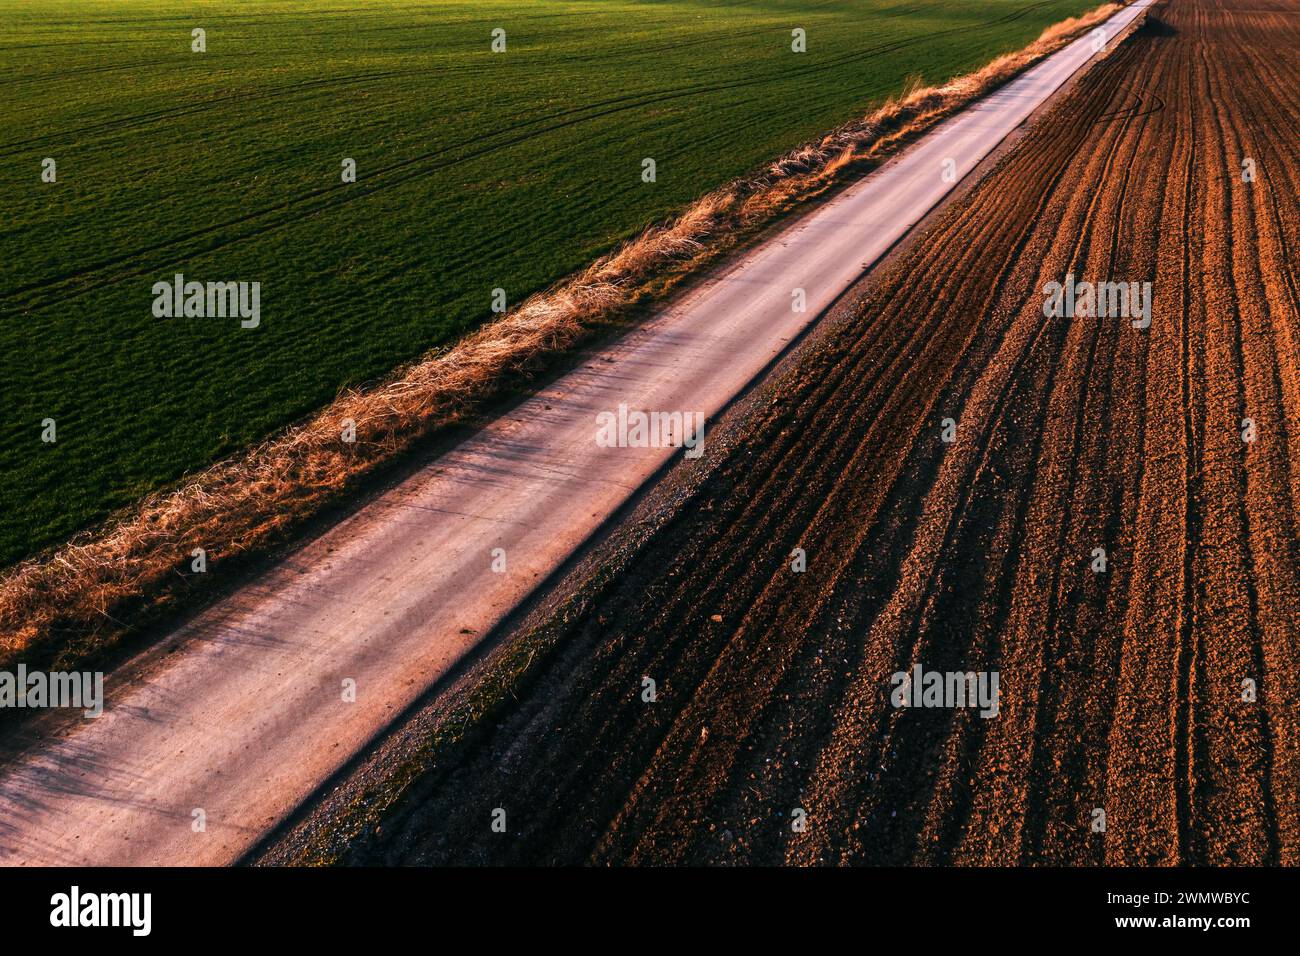 Straight asphalt country road between cultivated wheat plantation and ploughed field, aerial shot from drone pov, high angle view Stock Photo